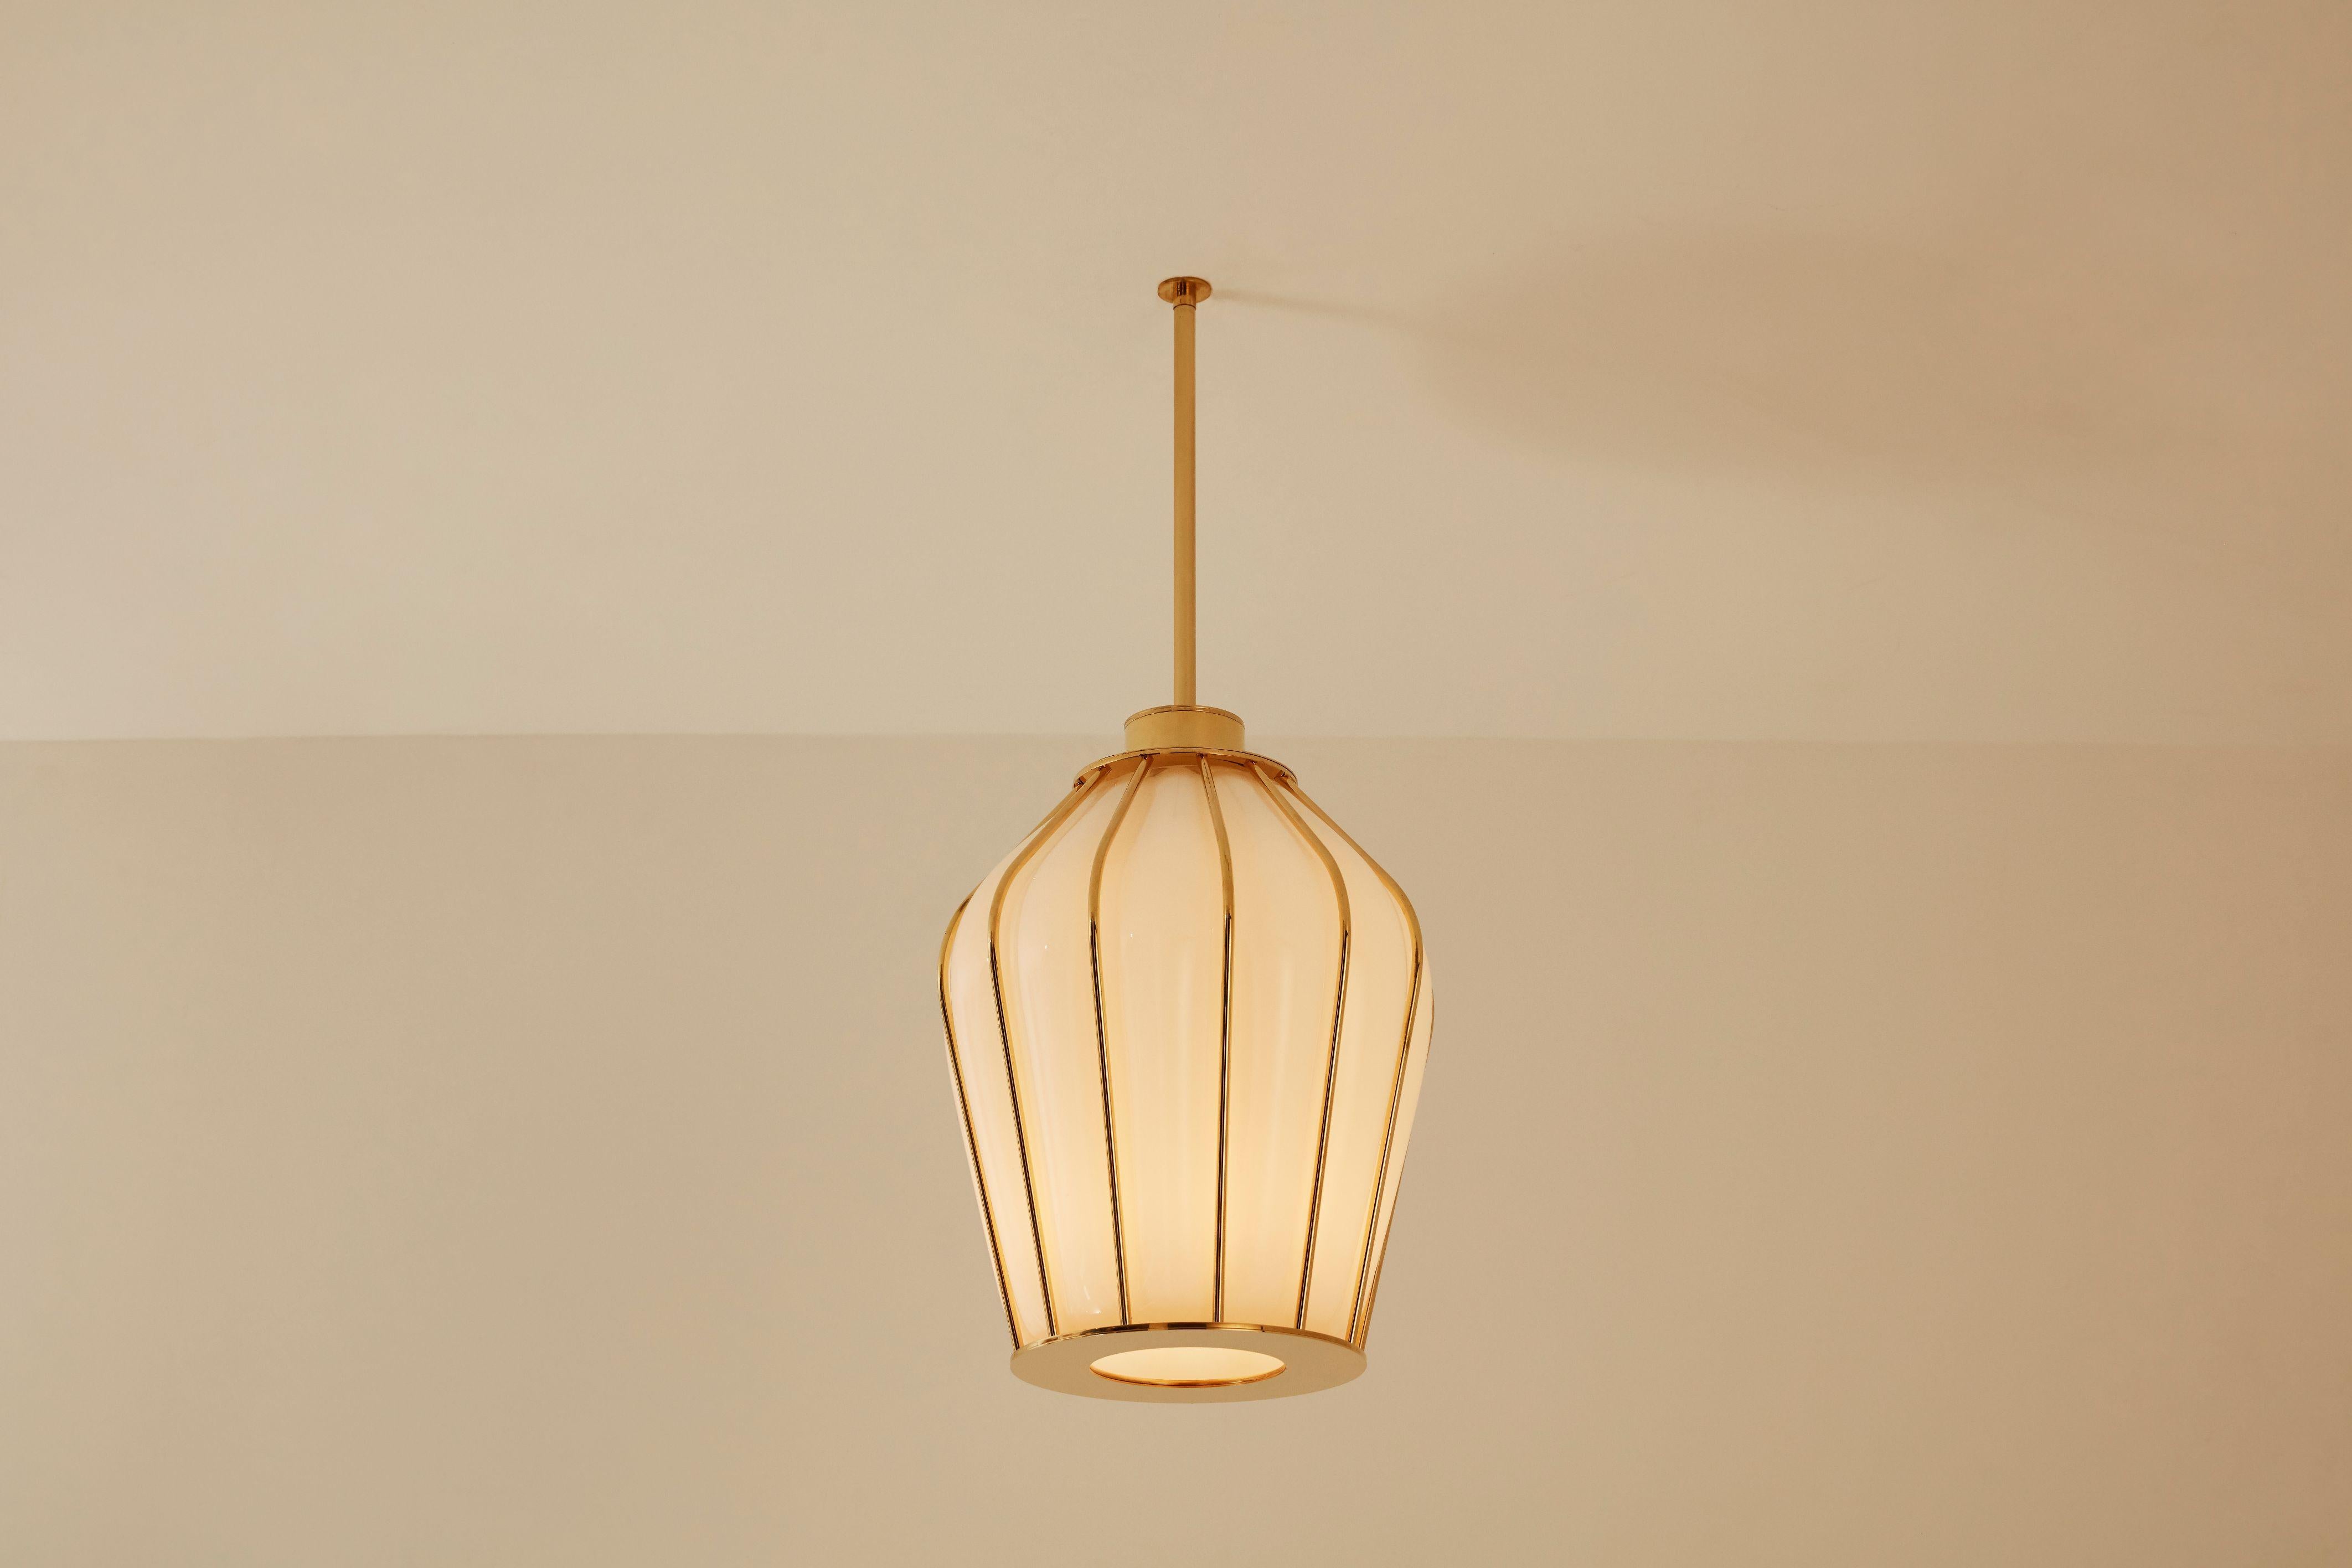 Sky lantern pendant Light by Mydriaz
Dimensions: Diameter 28 x height 38 cm
Materials: Brass, glass
Finishes: Golden-plated, polished brass, white nickel finish, on polished brass, Black nickel finish on
 polished brass

All our lamps can be